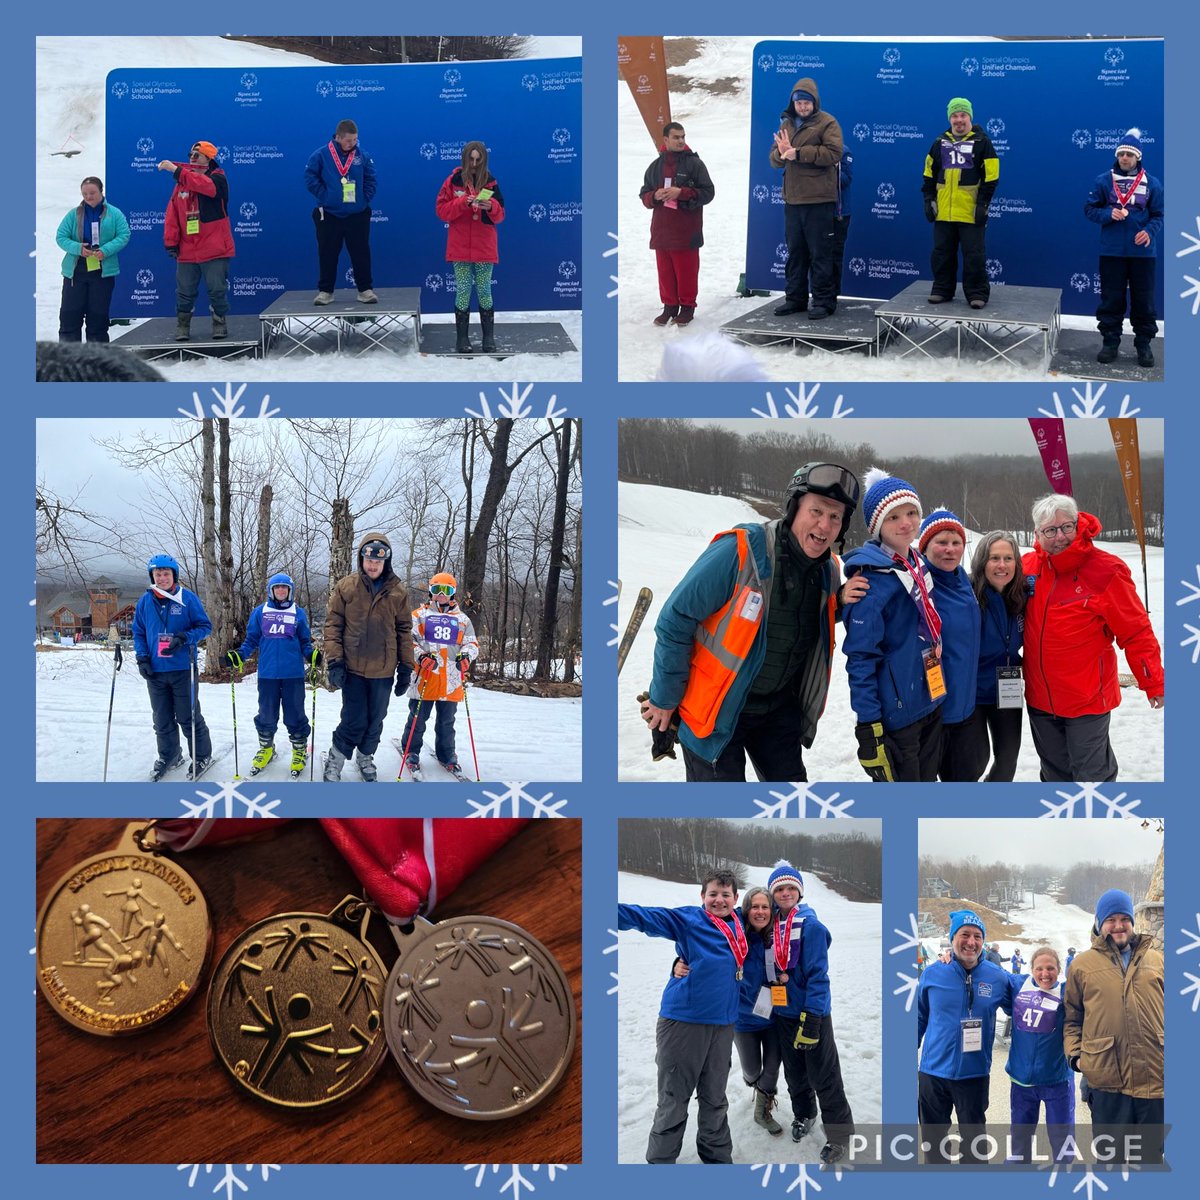 A fantastic day for our Bluebird ⛷️ athletes, coaches, family and friends from ⁦⁦@mountsnow⁩ the Vermont ⁦⁦@SpecialOlympics⁩ on Friday. Special thanks to the ⁦@HermitageClub⁩ for hosting! #Vermont #ThankaVolunteer #AdaptiveSnowsports